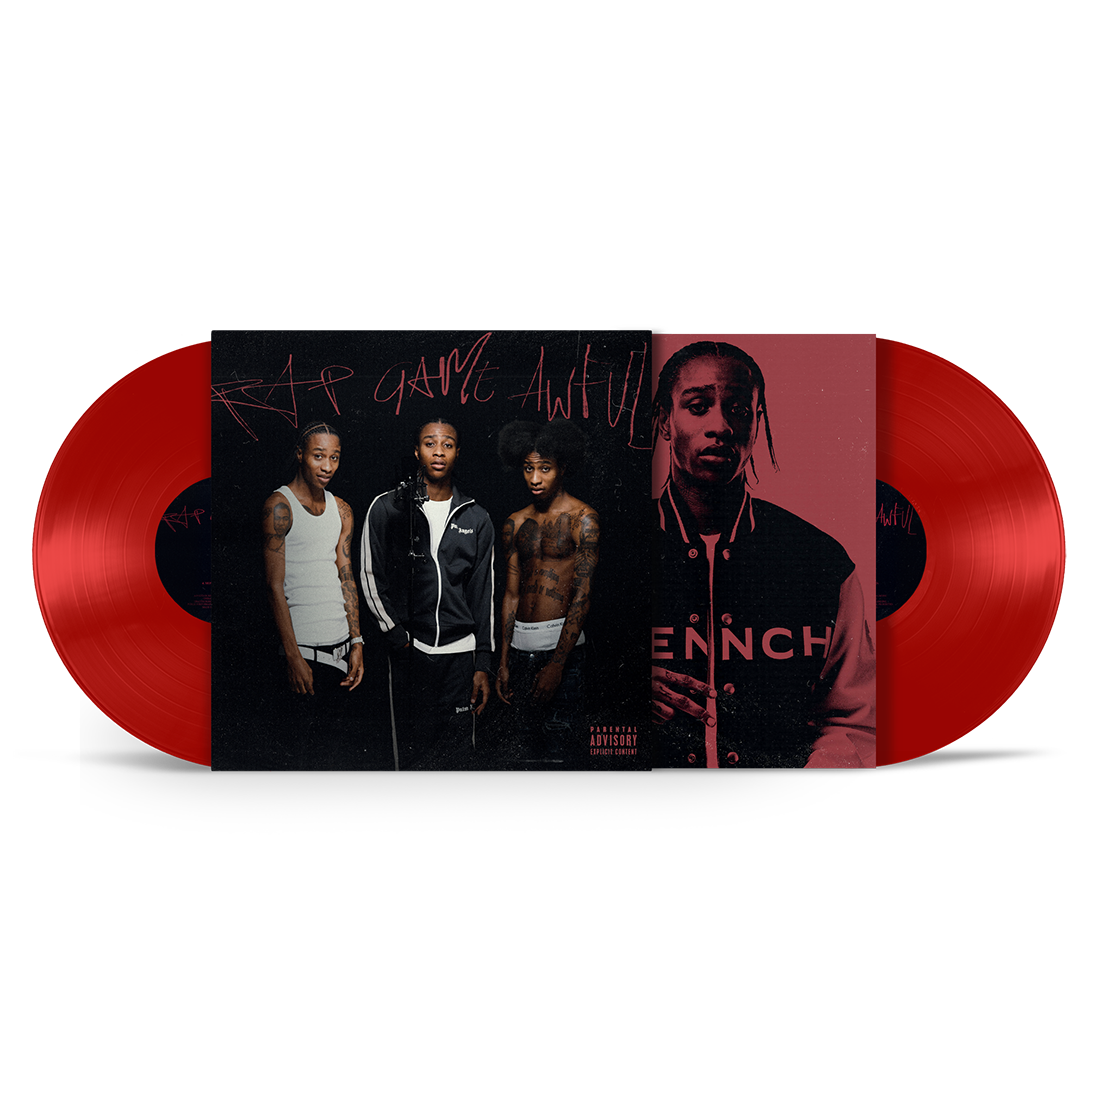 Rap Game Awful: Red Vinyl 2LP + Signed Art Card